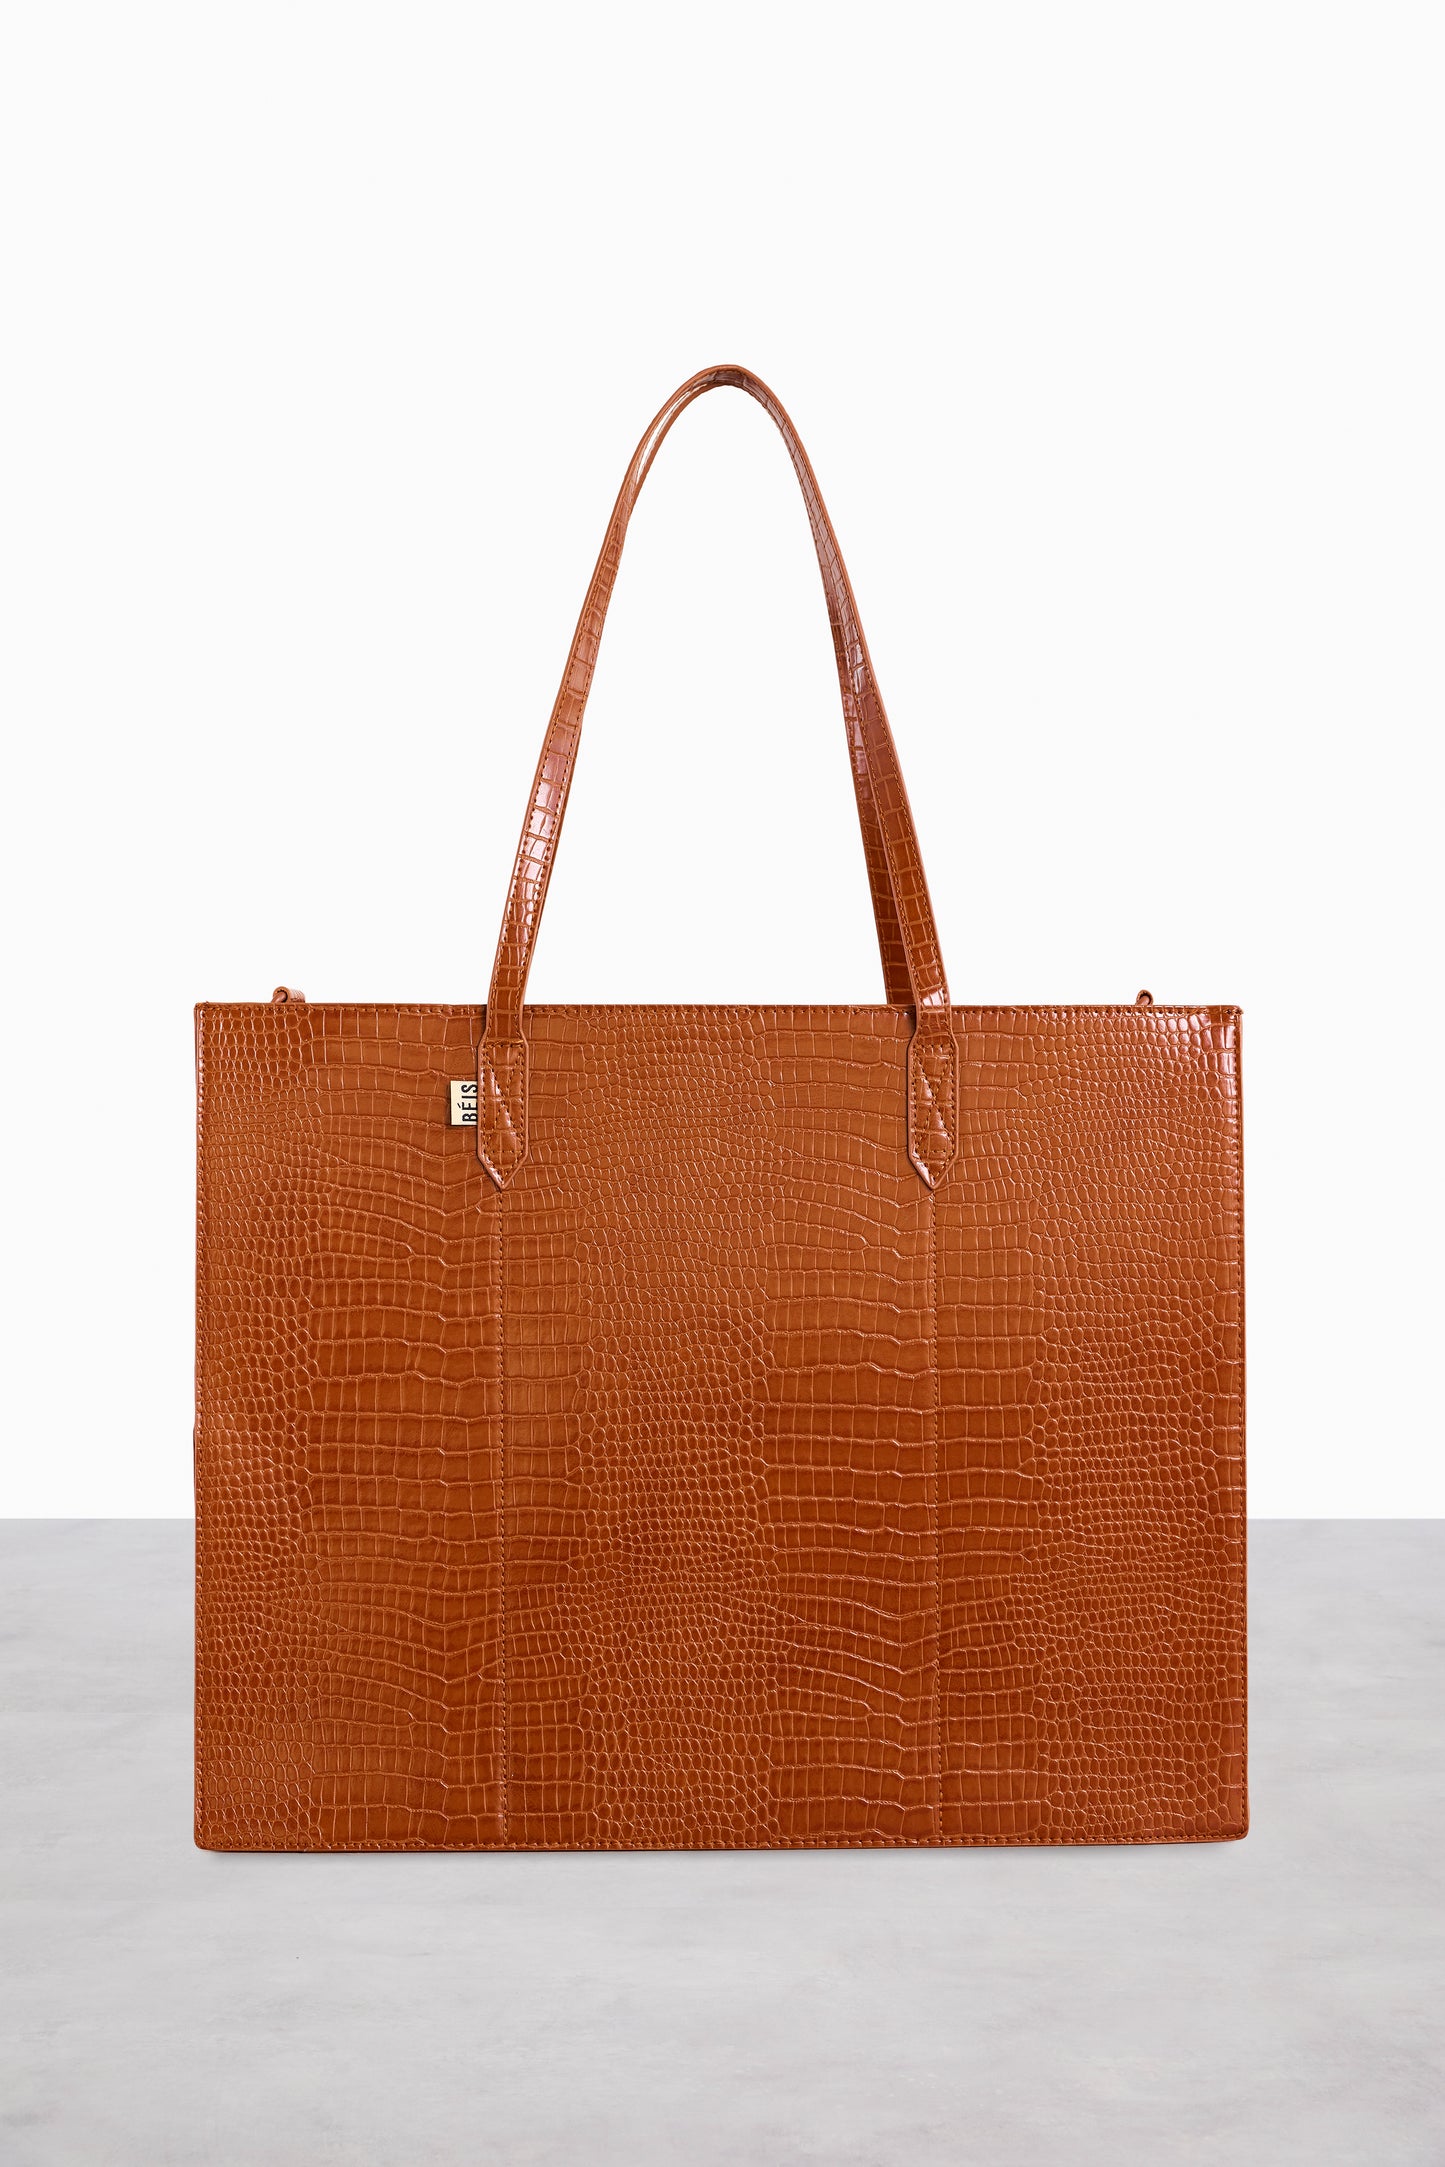 The Large Work Tote in Cognac Croc